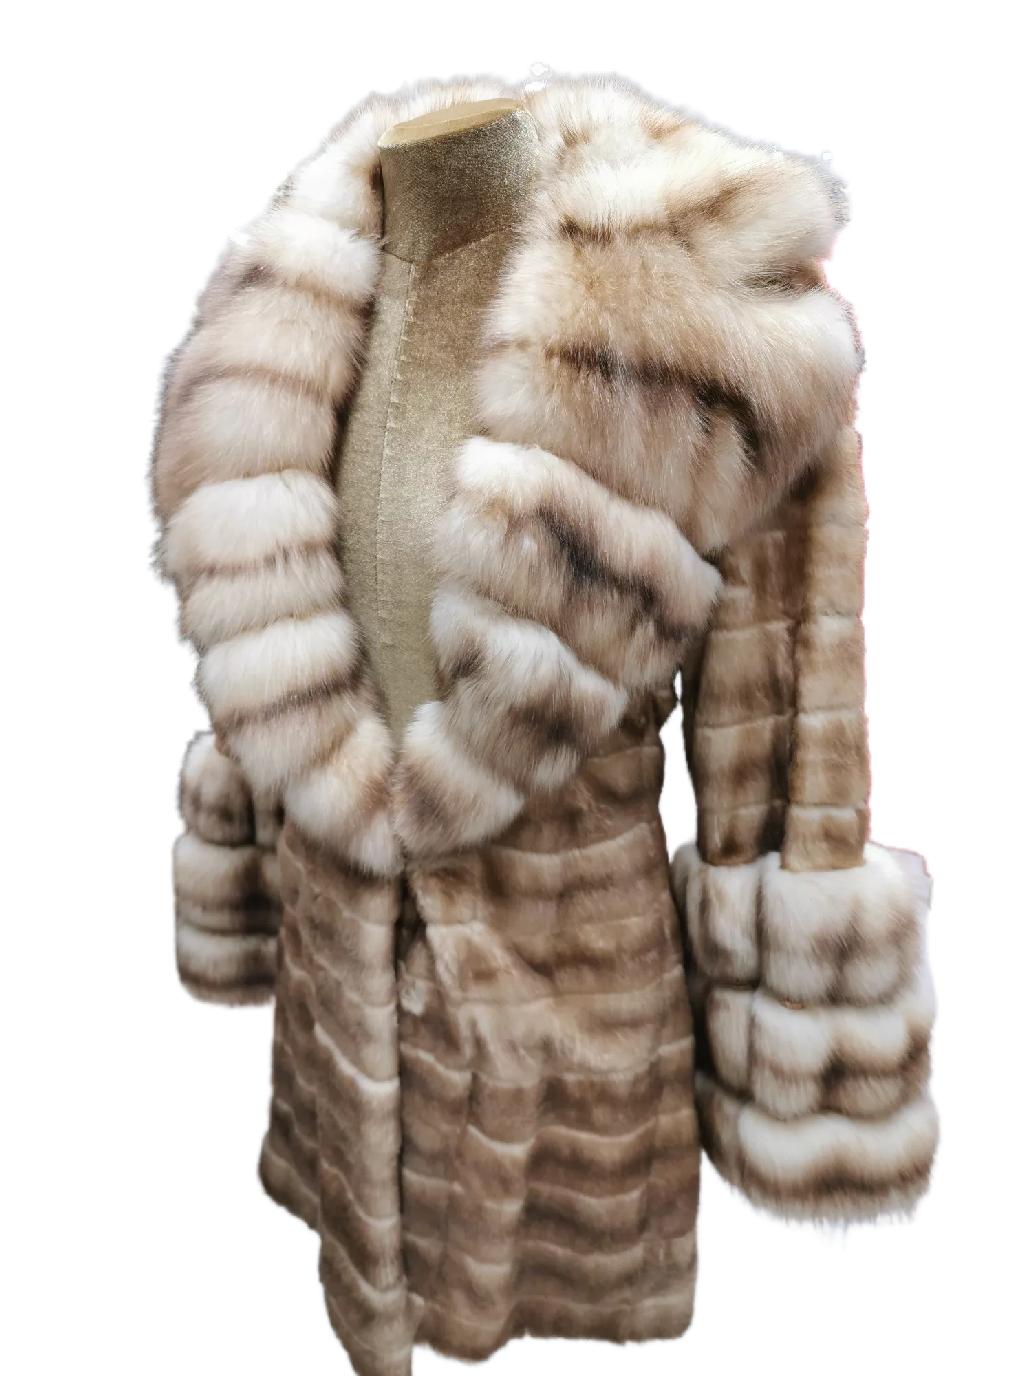 Brand New with tags luxurious unique Dennis Basso Ermine sable fur coat with portrait collar  cuffed sleeves

Made in USA

MEASUREMENTS :

SIZE: 6-8

LENGTH: 41